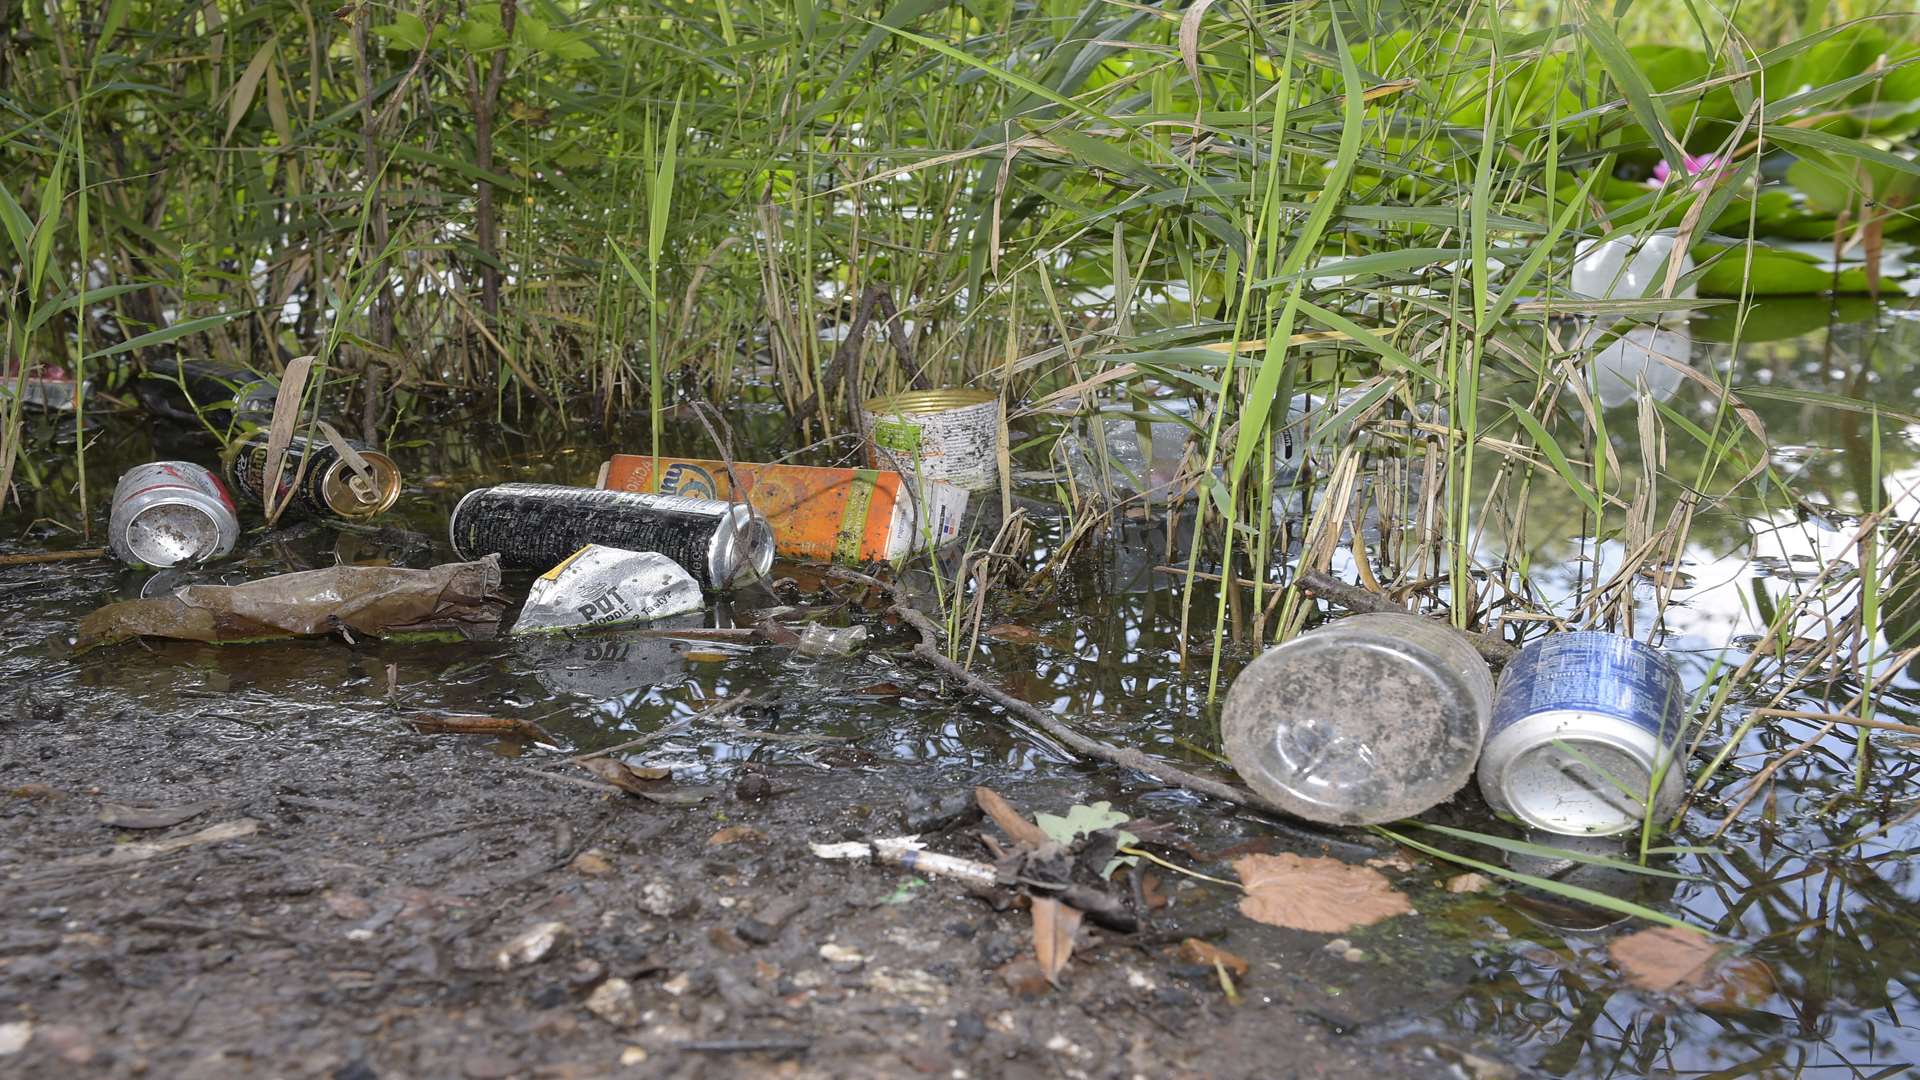 The land, owned by the MoD, is targeted by litterbugs